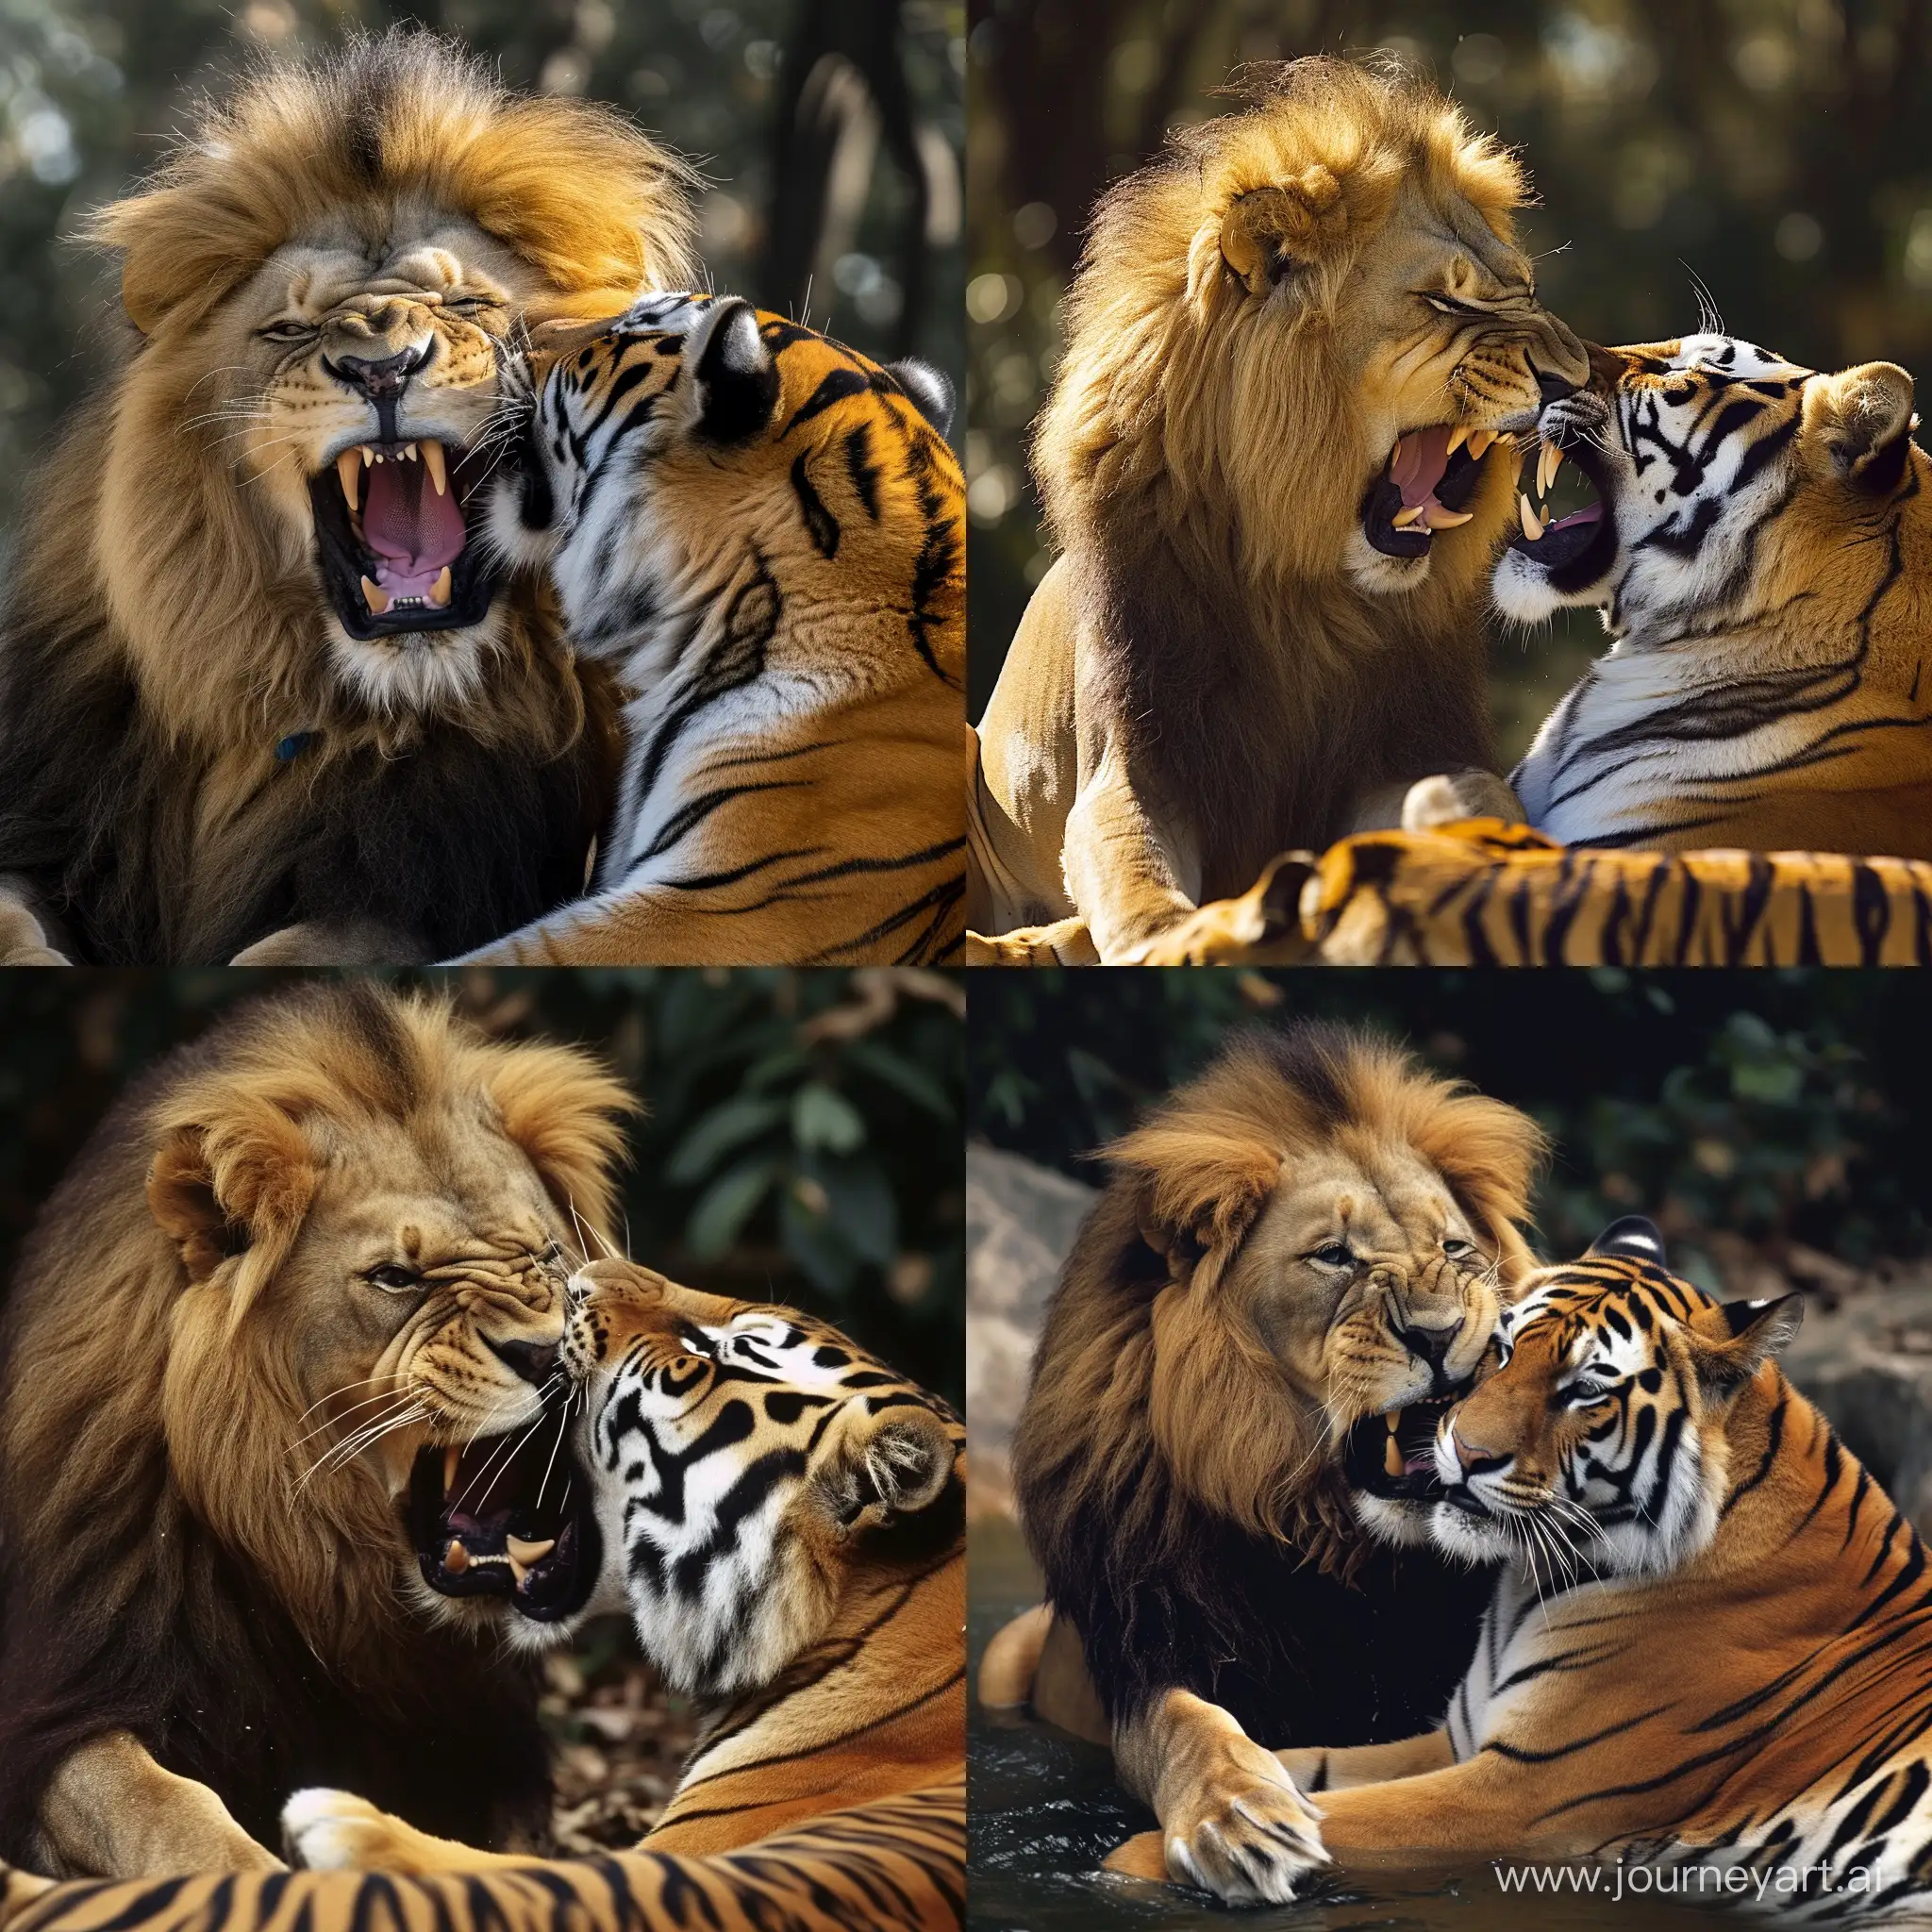 Dominant-Lion-Asserts-Superiority-by-Biting-Tiger